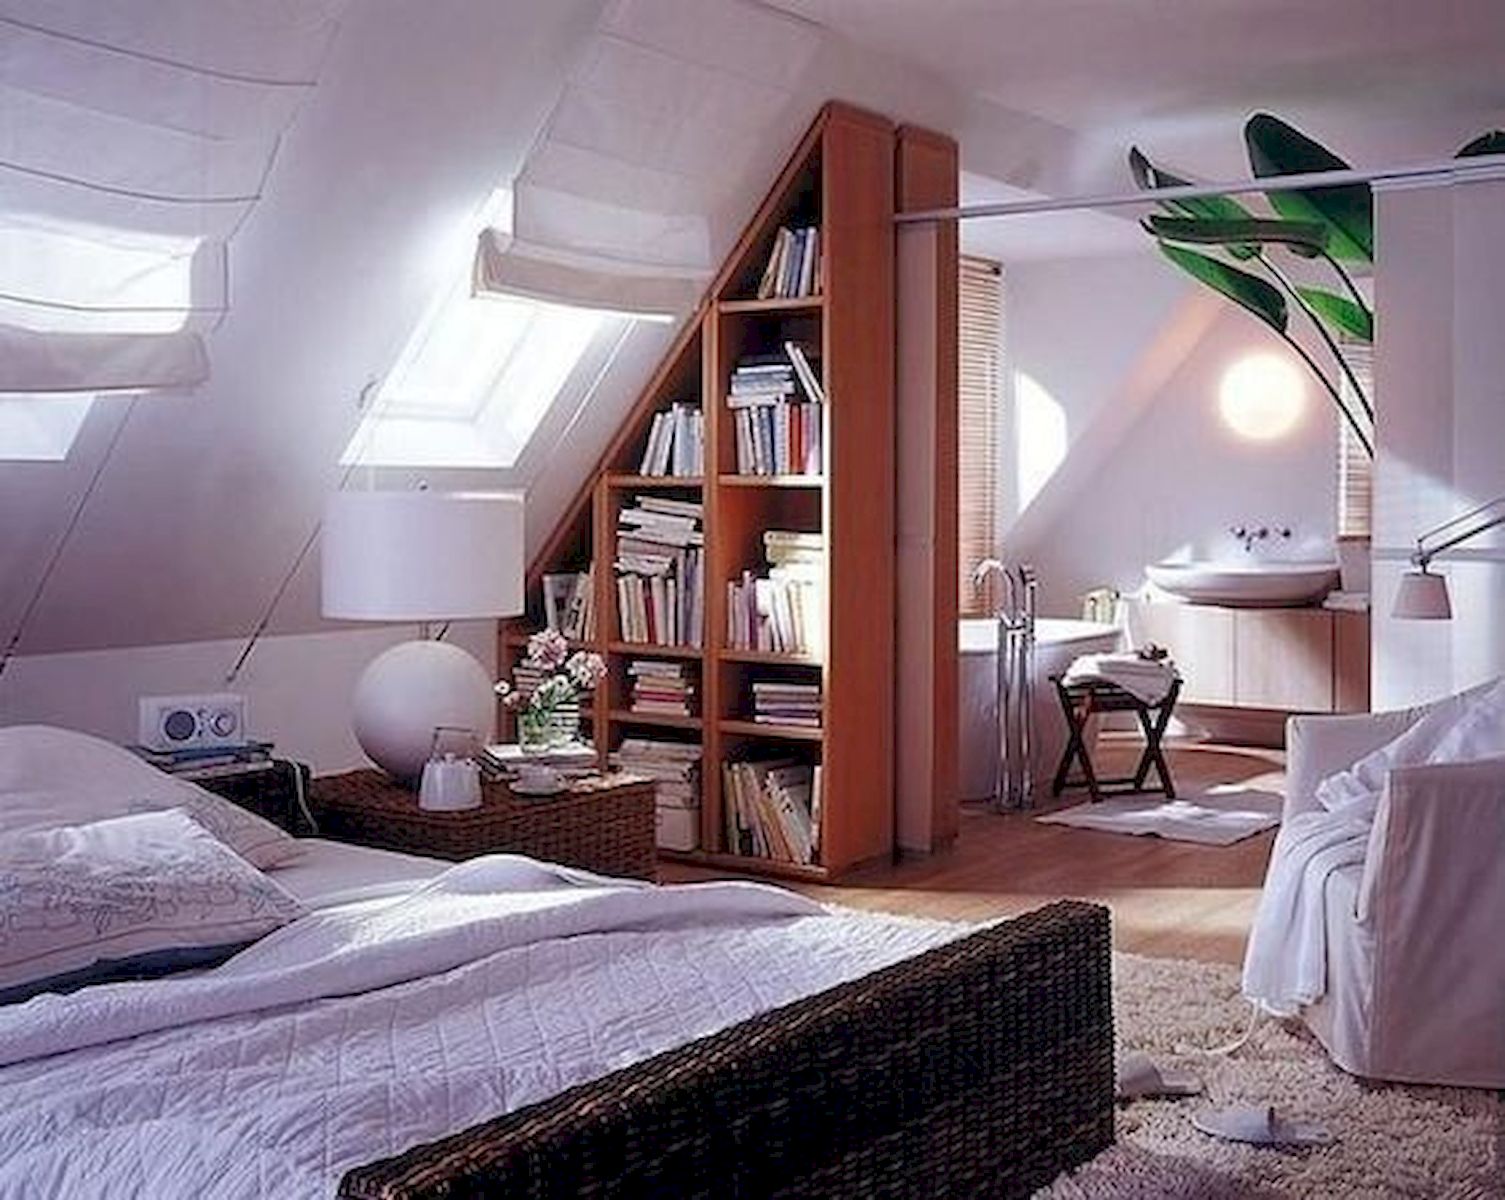 40 Awesome Attic Bedroom Design and Decorating Ideas (33)